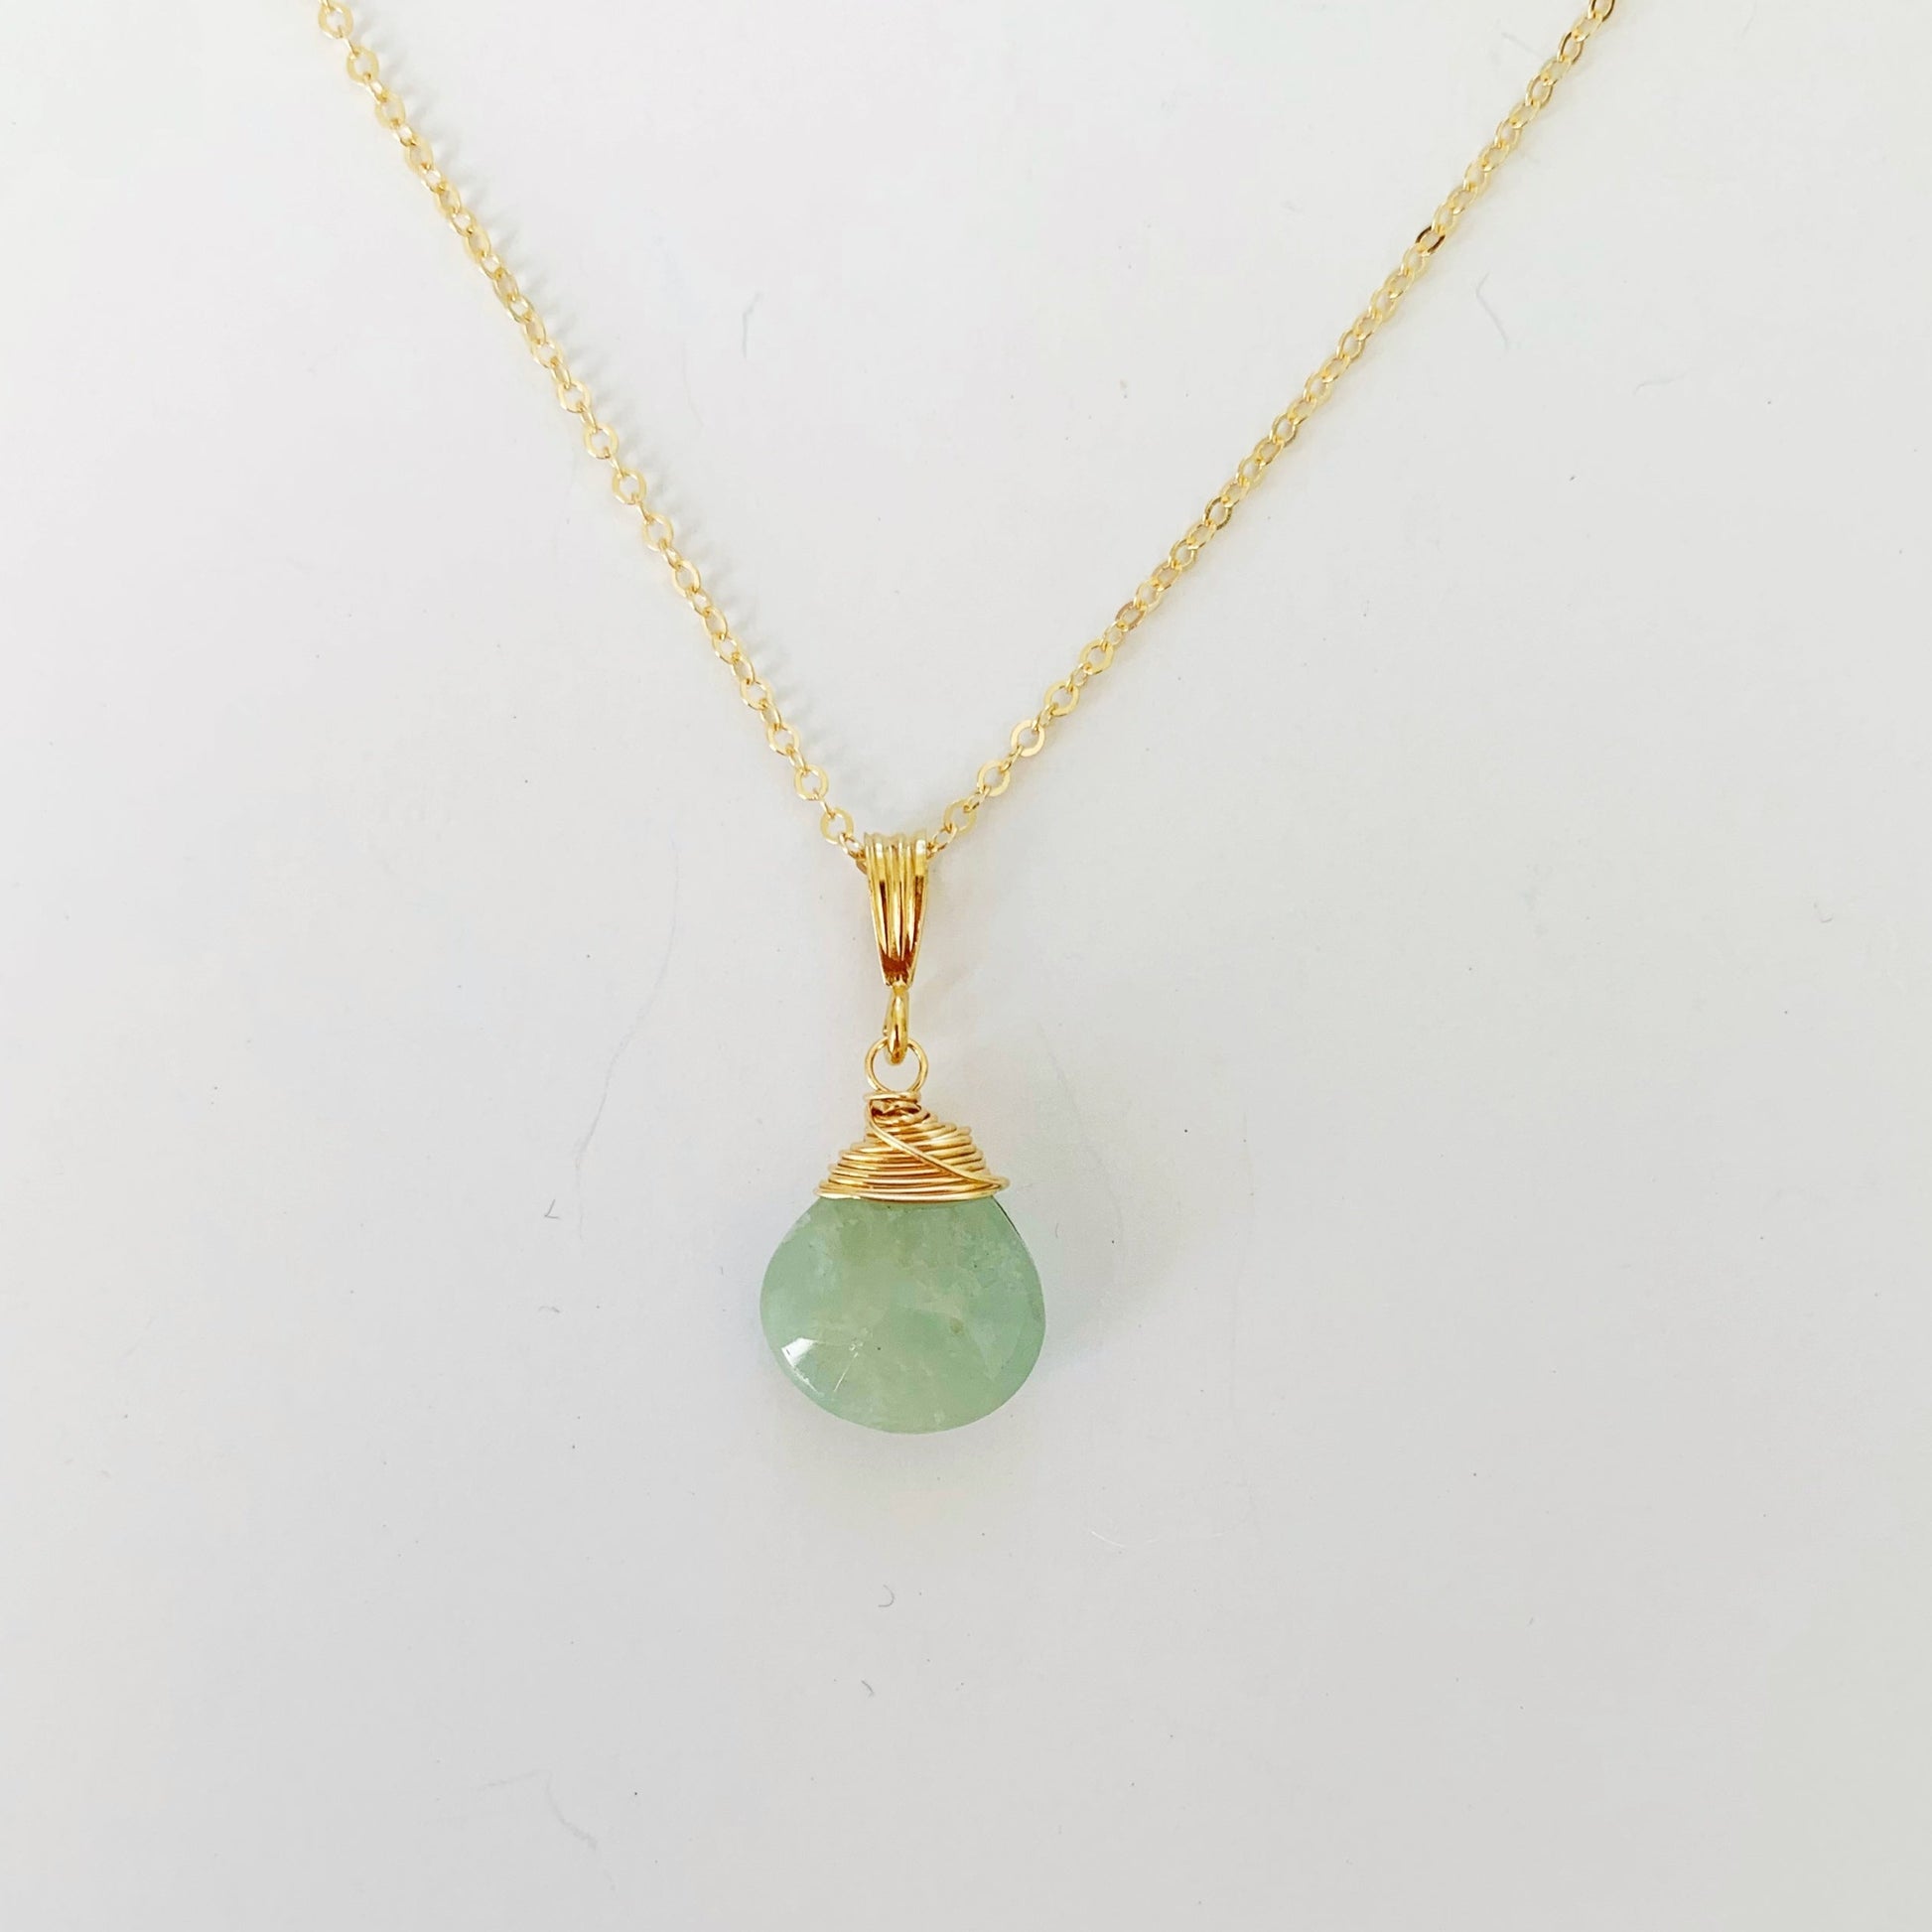 raindrop aqumarine 14k gold filled wire wrapped pendant necklace pictured here on a white surface